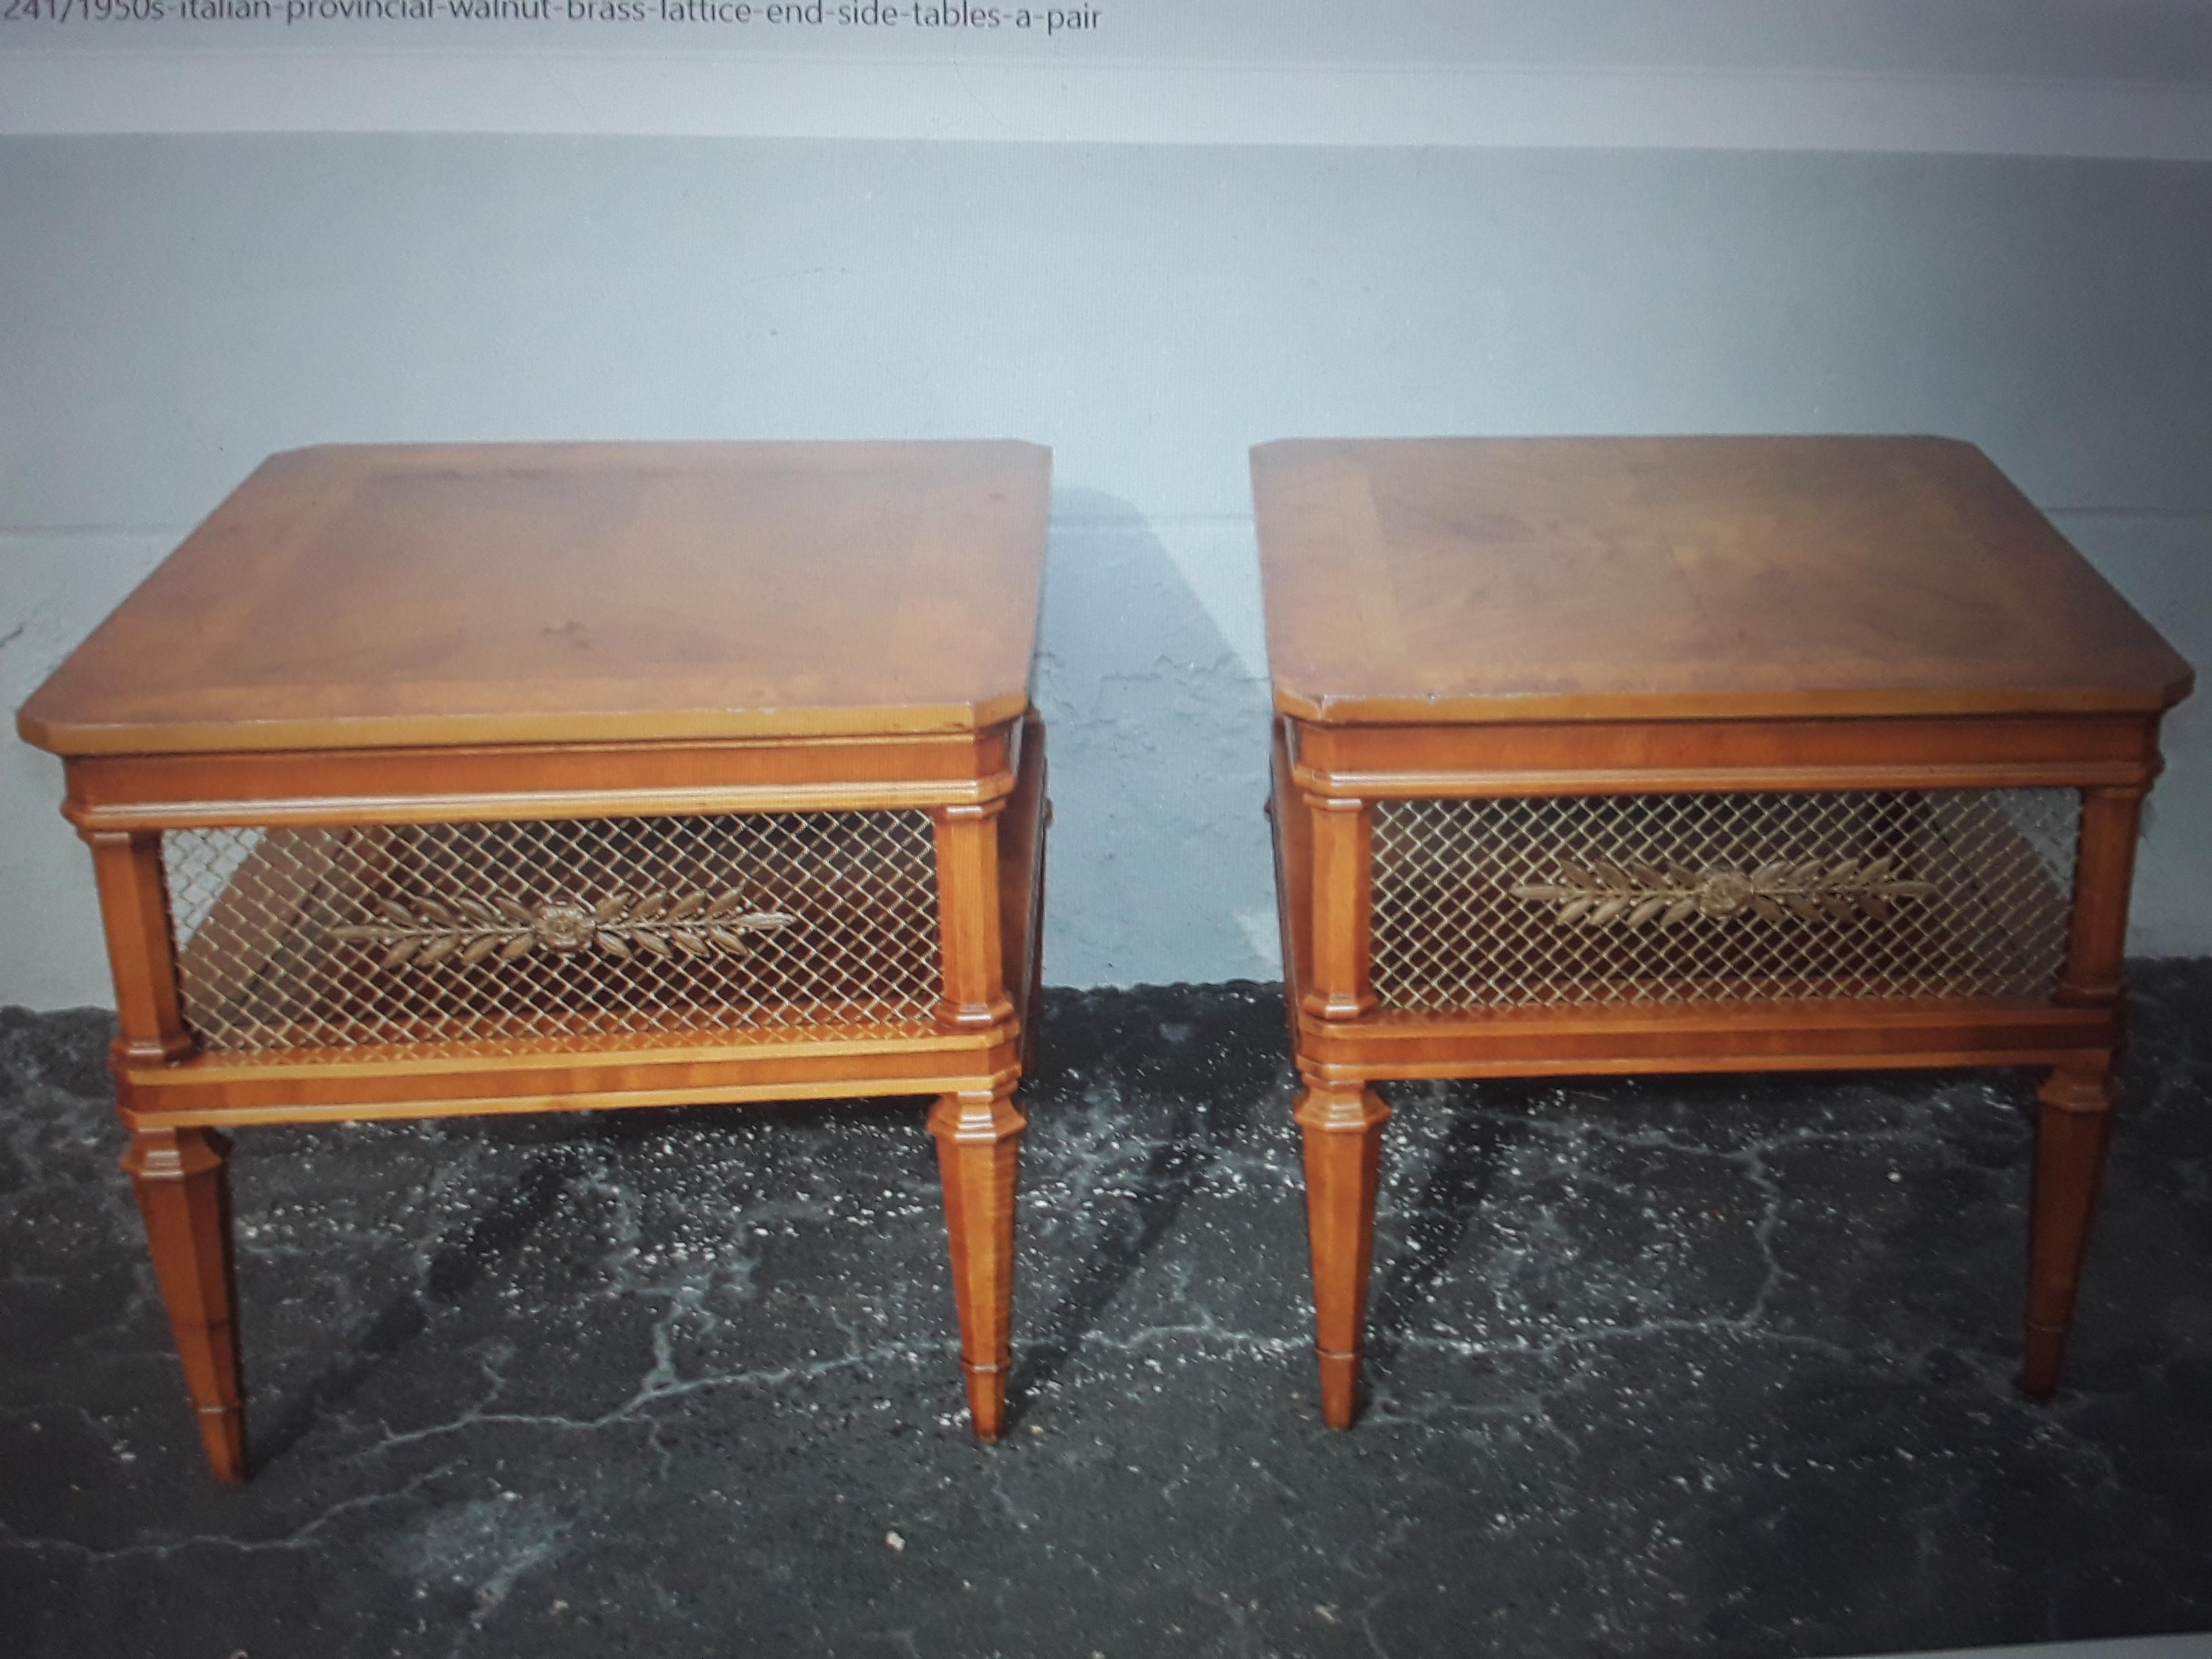 Pair 1950's French Provincial Walnut  / Brass Lattice End/ Side Tables In Good Condition For Sale In Opa Locka, FL